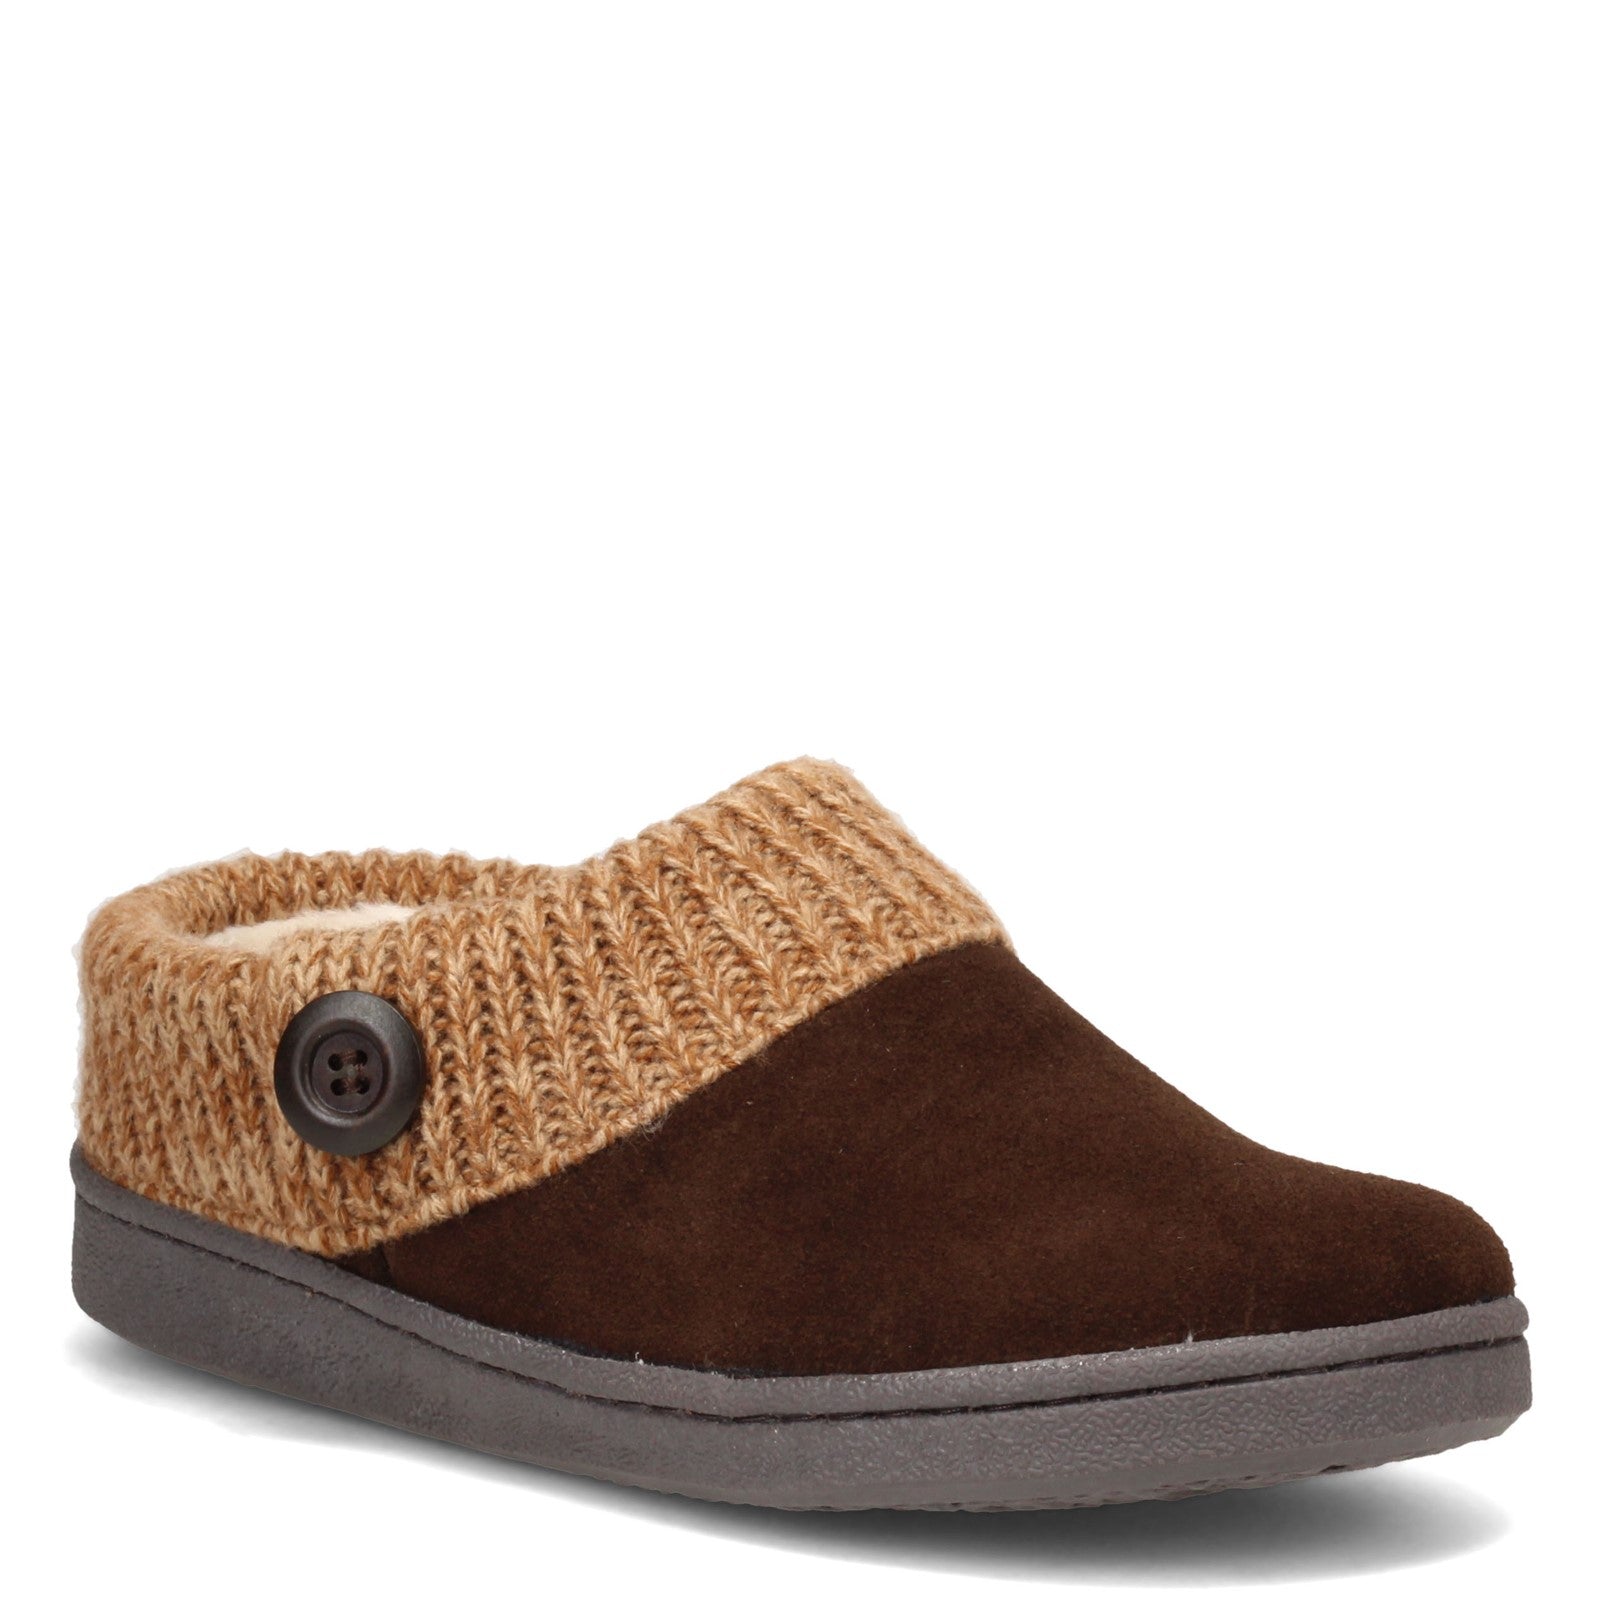 Clarks Women's Suede Bowknot Moccasin Indoor/Outdoor Slippers with Faux Fur  Lining (9 M US, Cognac) - Walmart.com